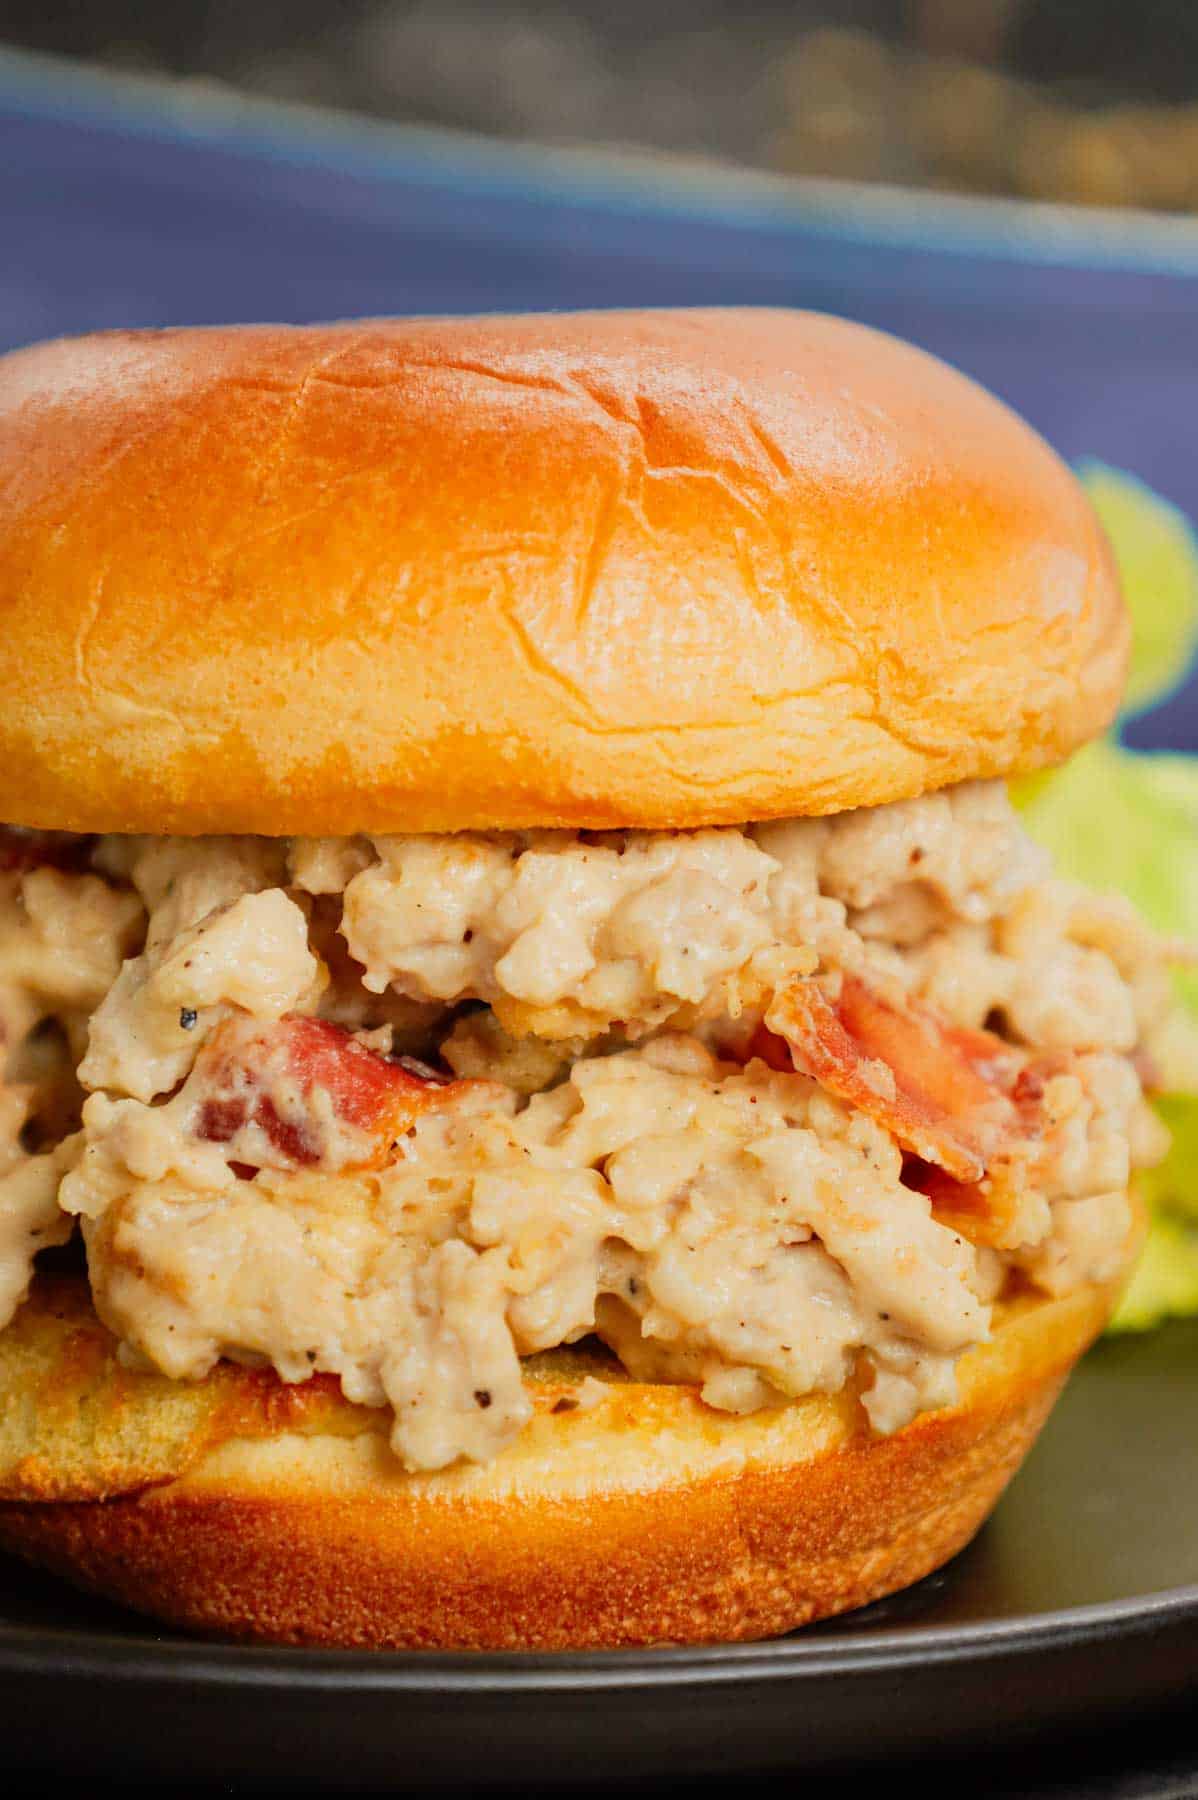 Chicken Alfredo Sloppy Joes are delicious sandwiches loaded with ground chicken and crisp bacon tossed in alfredo sauce and served on toasted garlic buttered brioche buns.